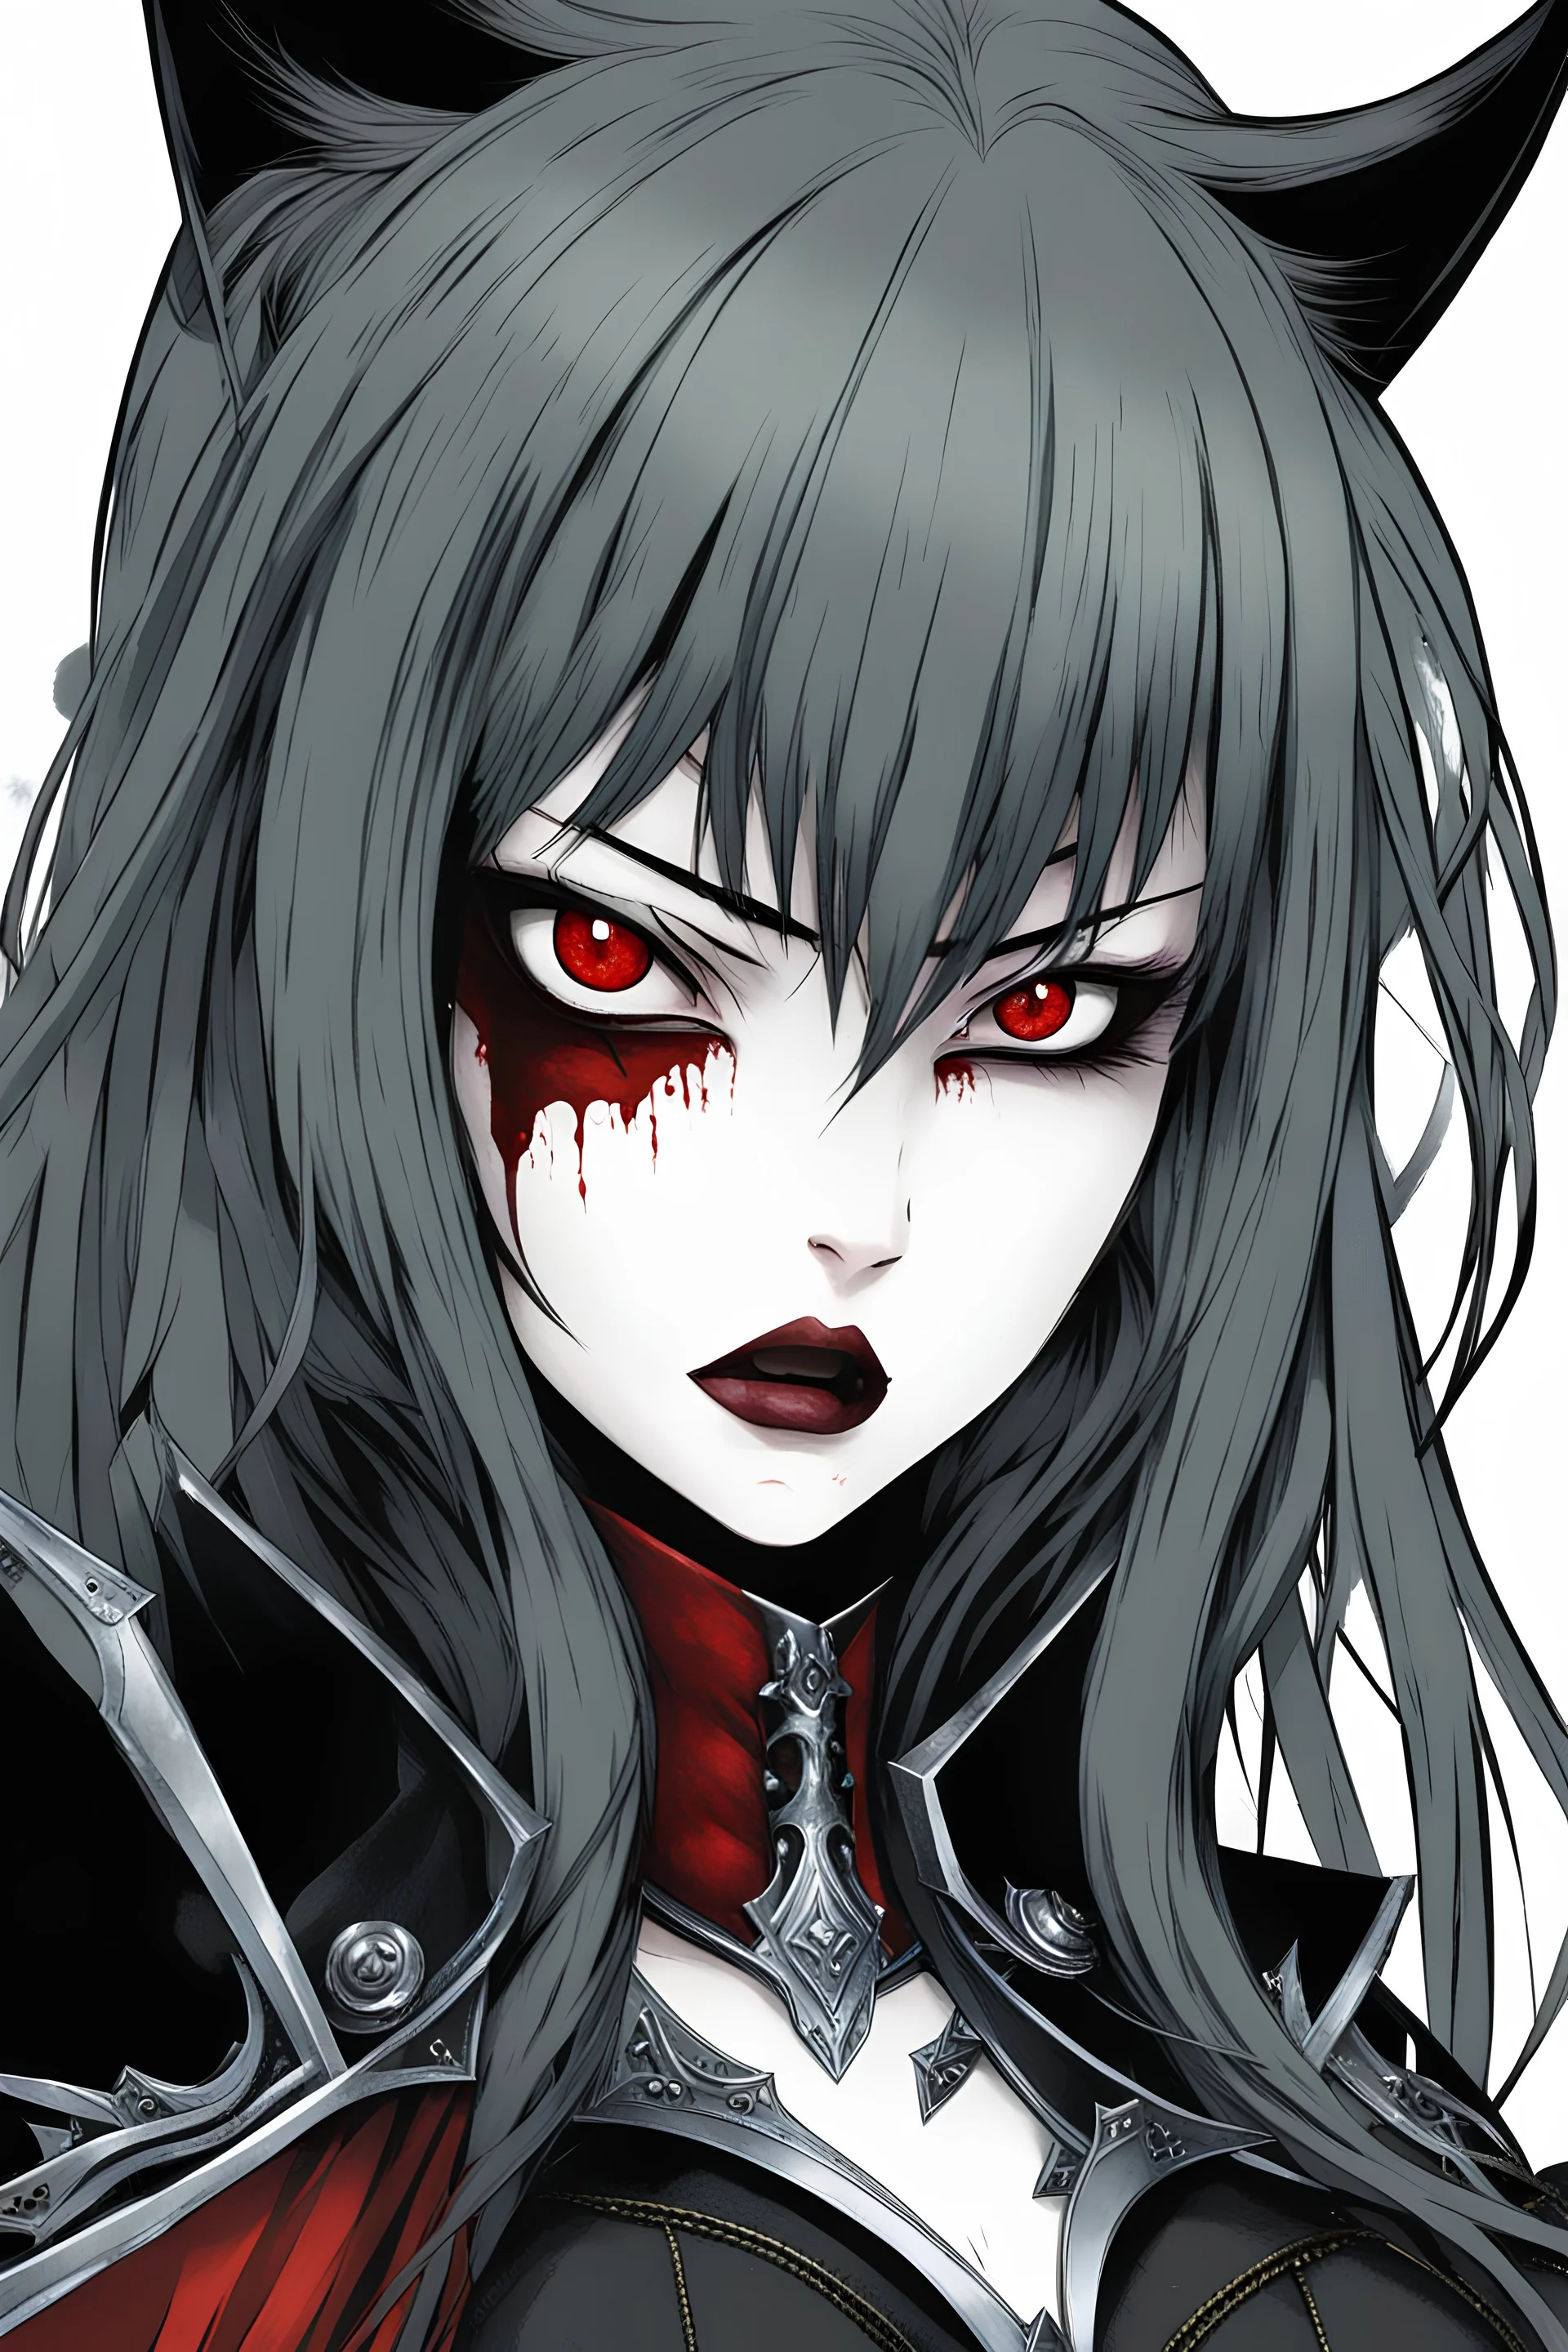 sadayo suzumura art, kazuma kaneko ART, a vampire girl, vampire teeth, angry face looking at the camera, wearing a armor, blood in her face, long red hair, white eyes, Black nails, inside of an Elden castle, close up on her face, cat ears